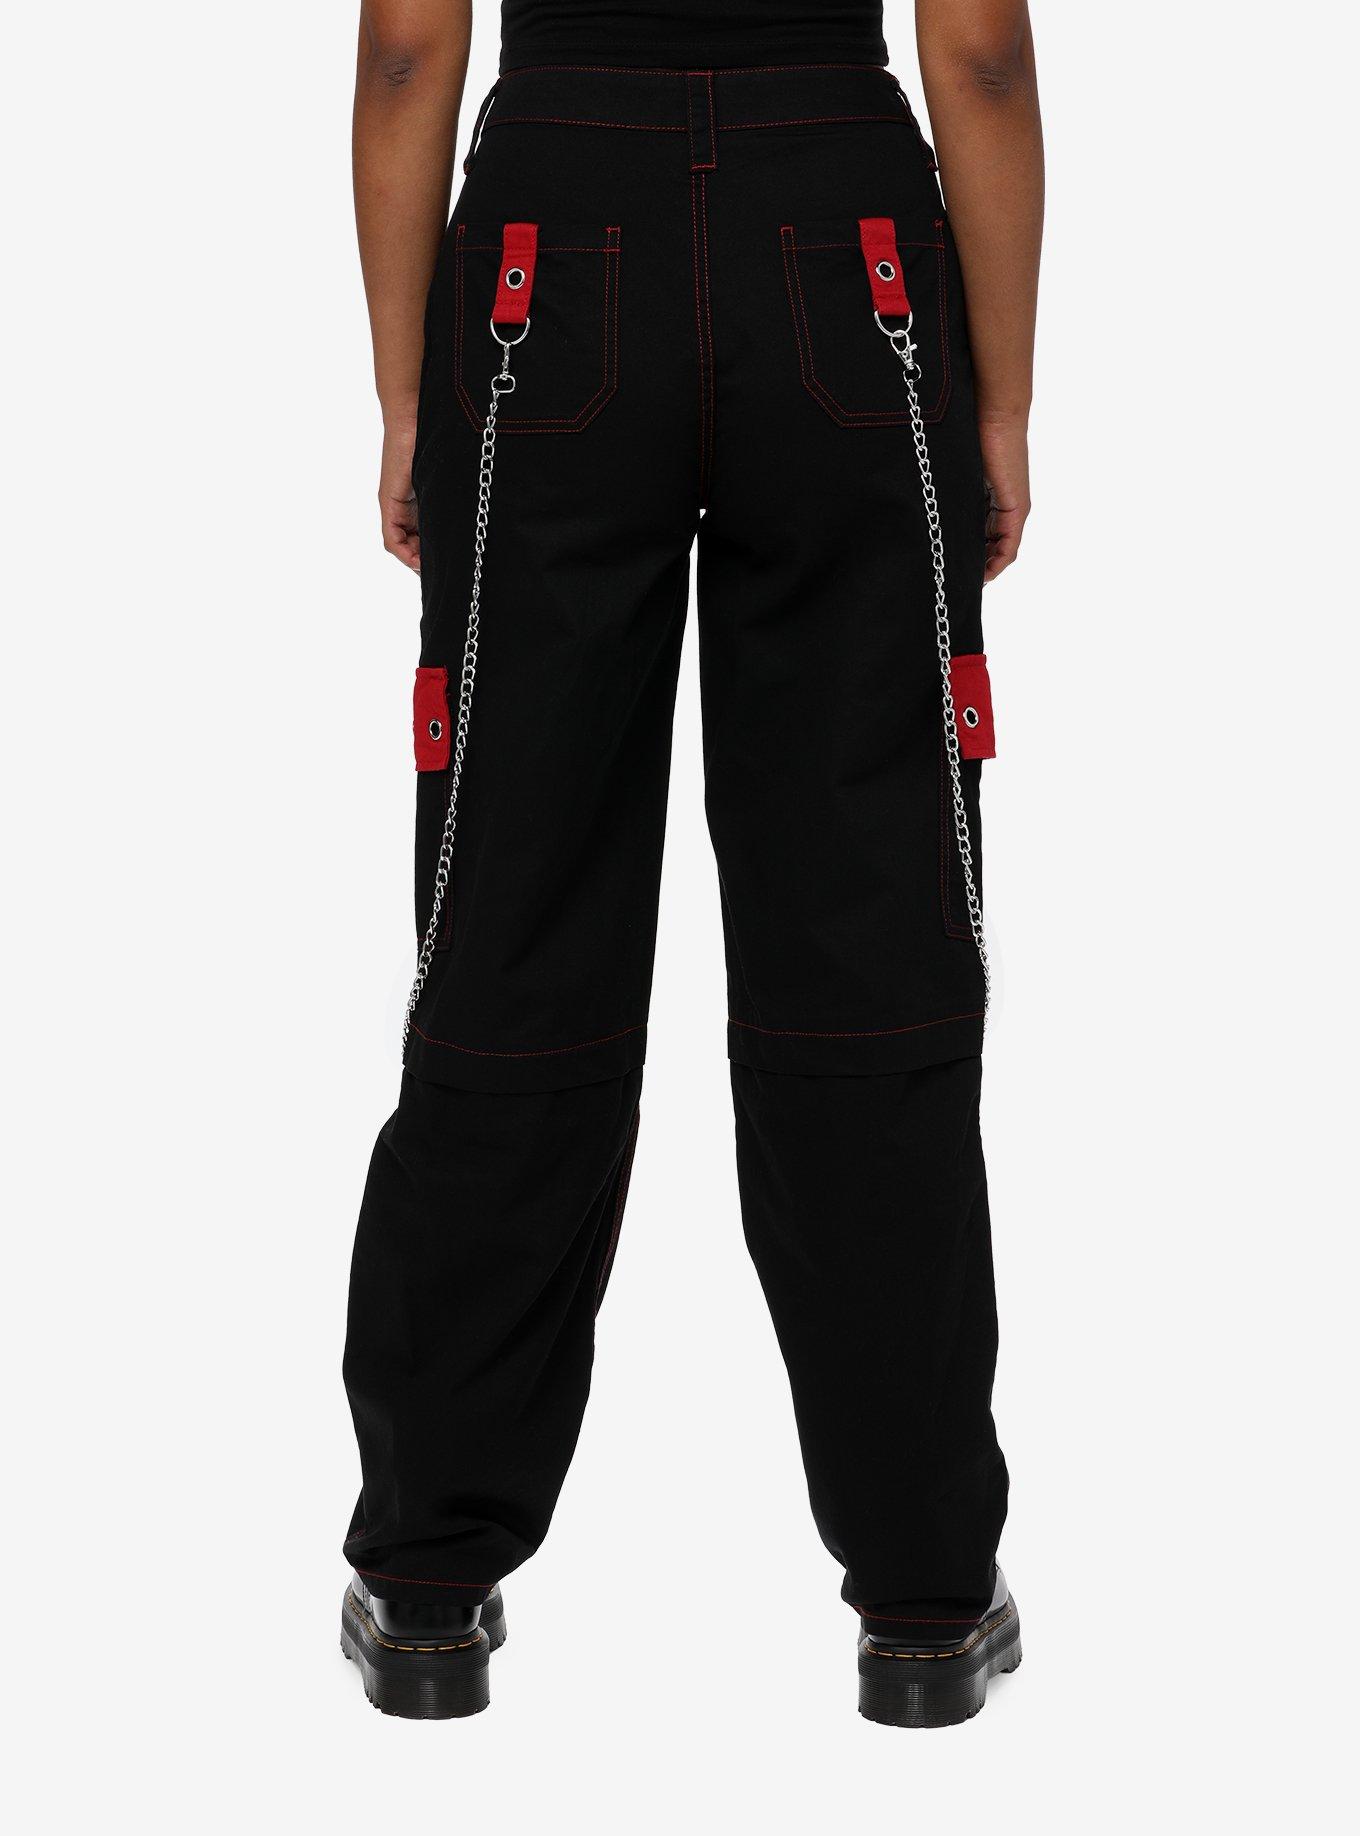 Good deal at Hot Topic's website on Tripp Pants.